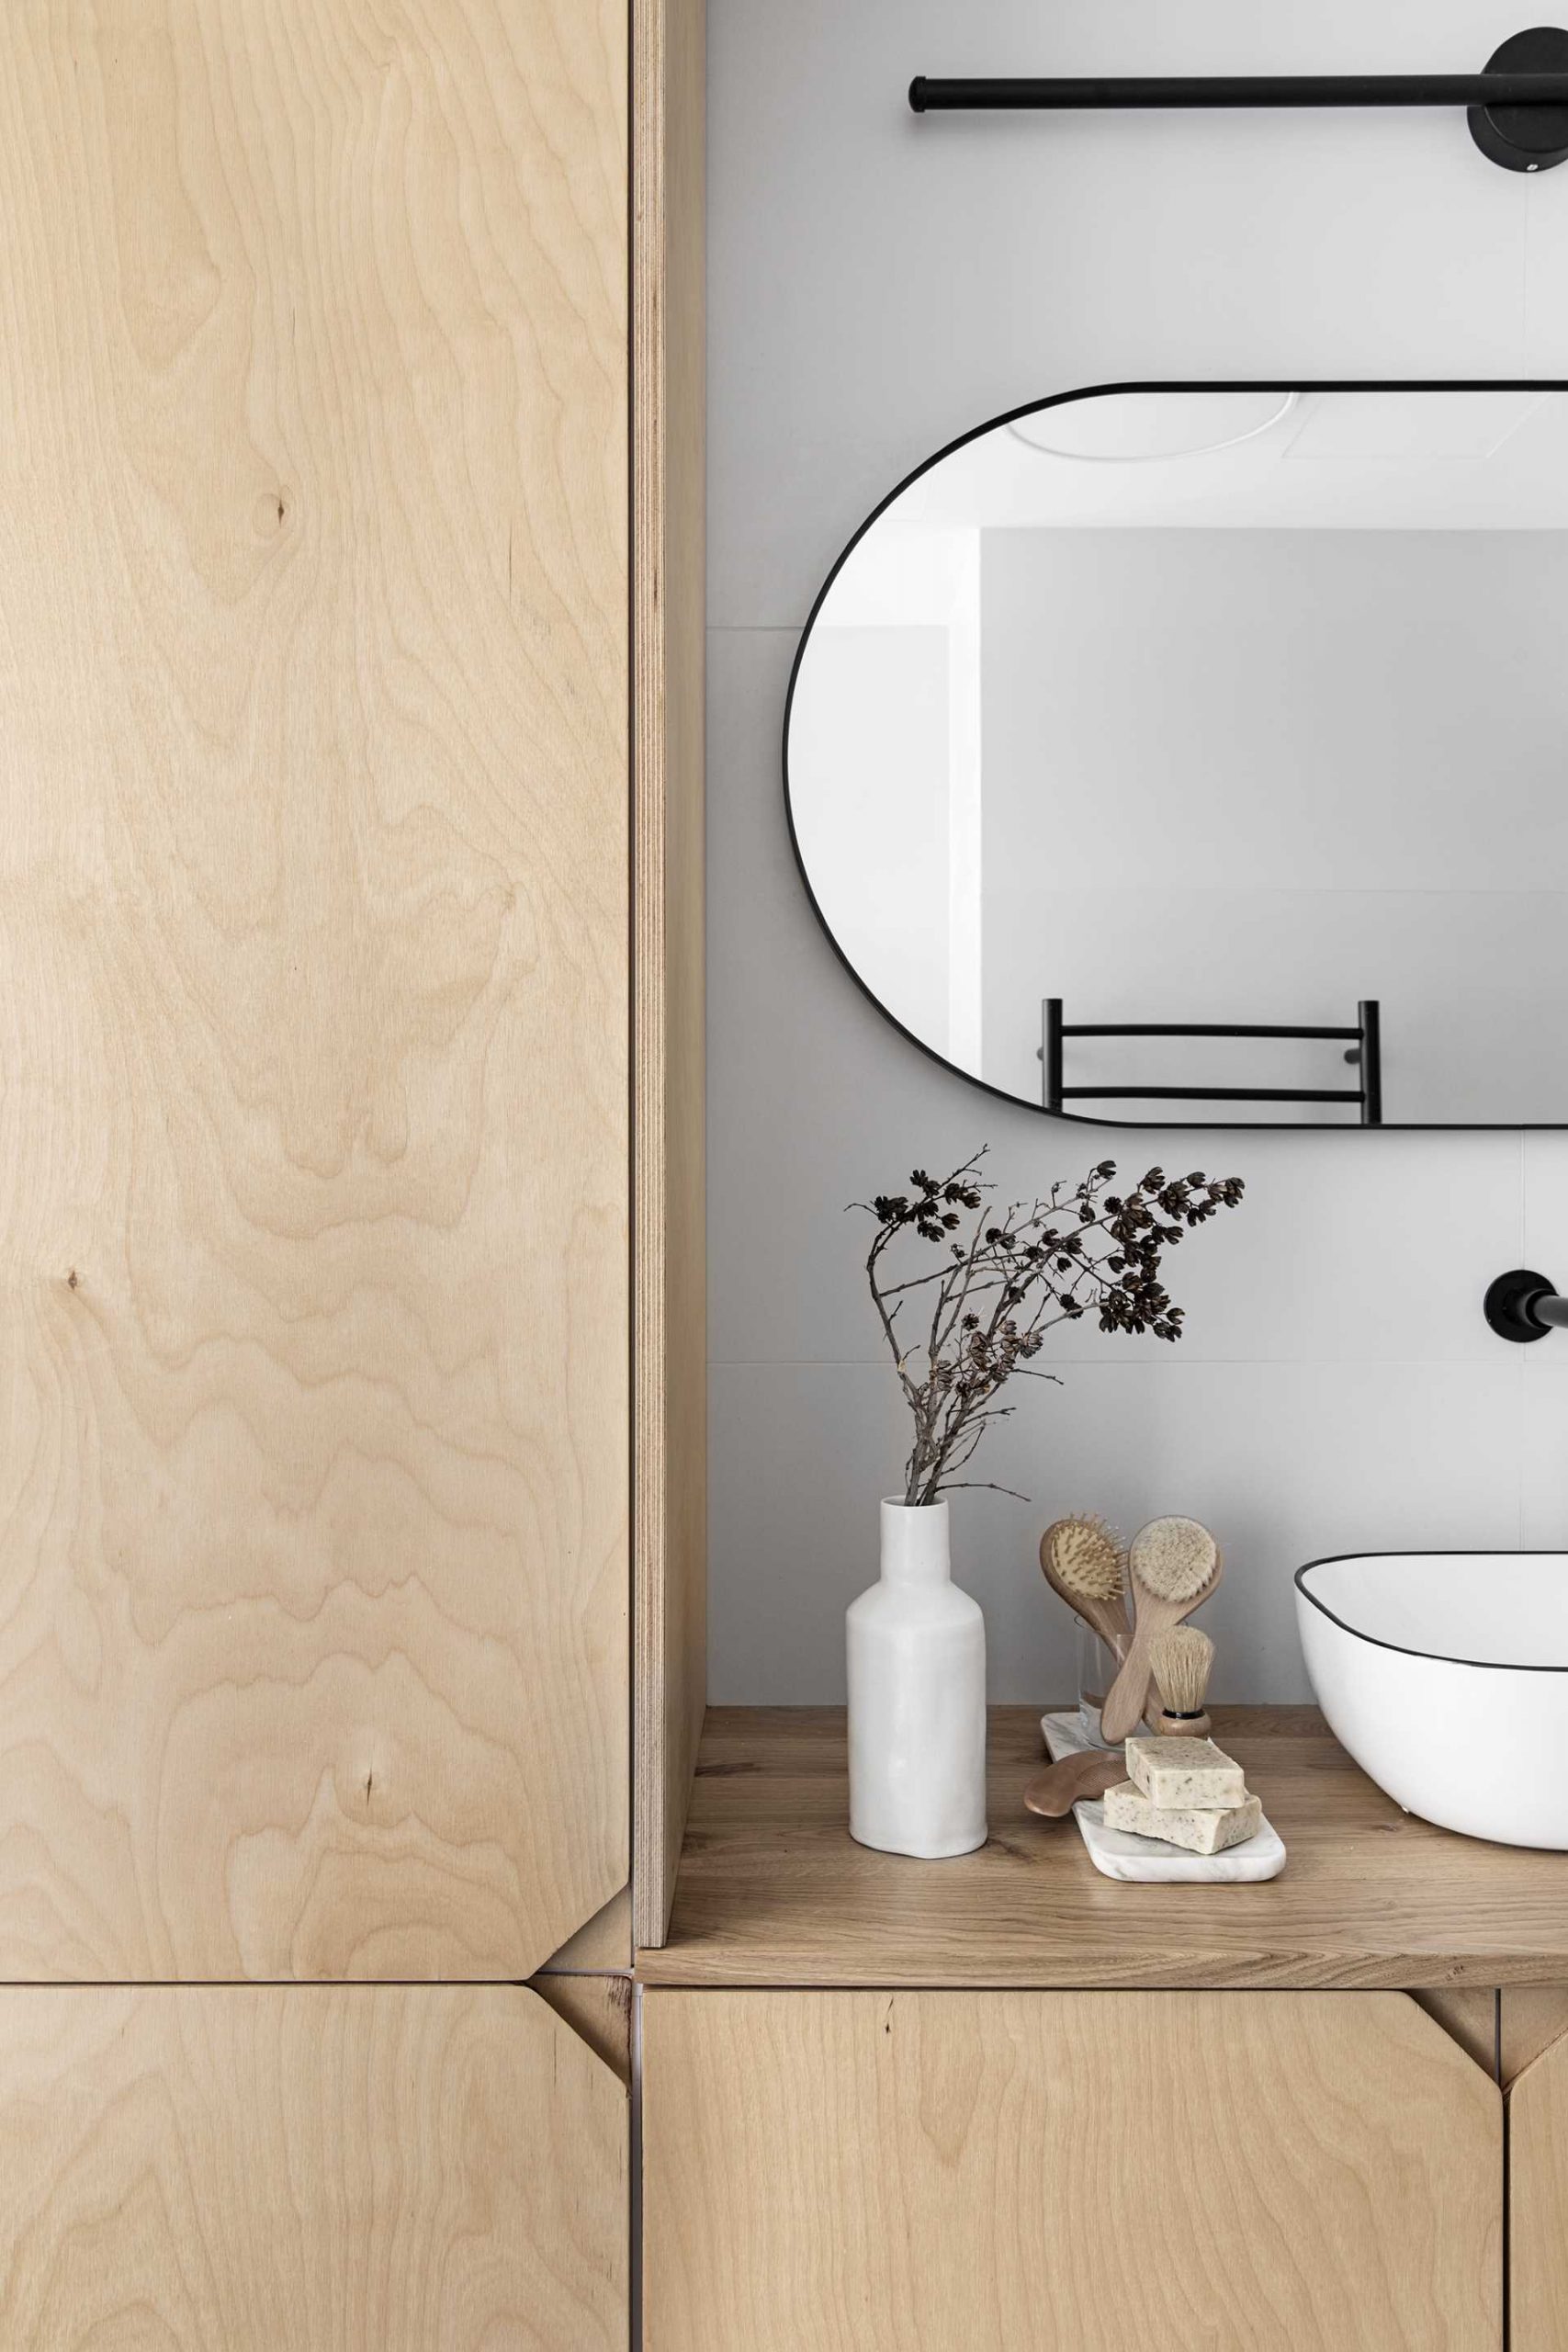 A modern bathroom with a wood vanity that includes cutouts instead of hardware.